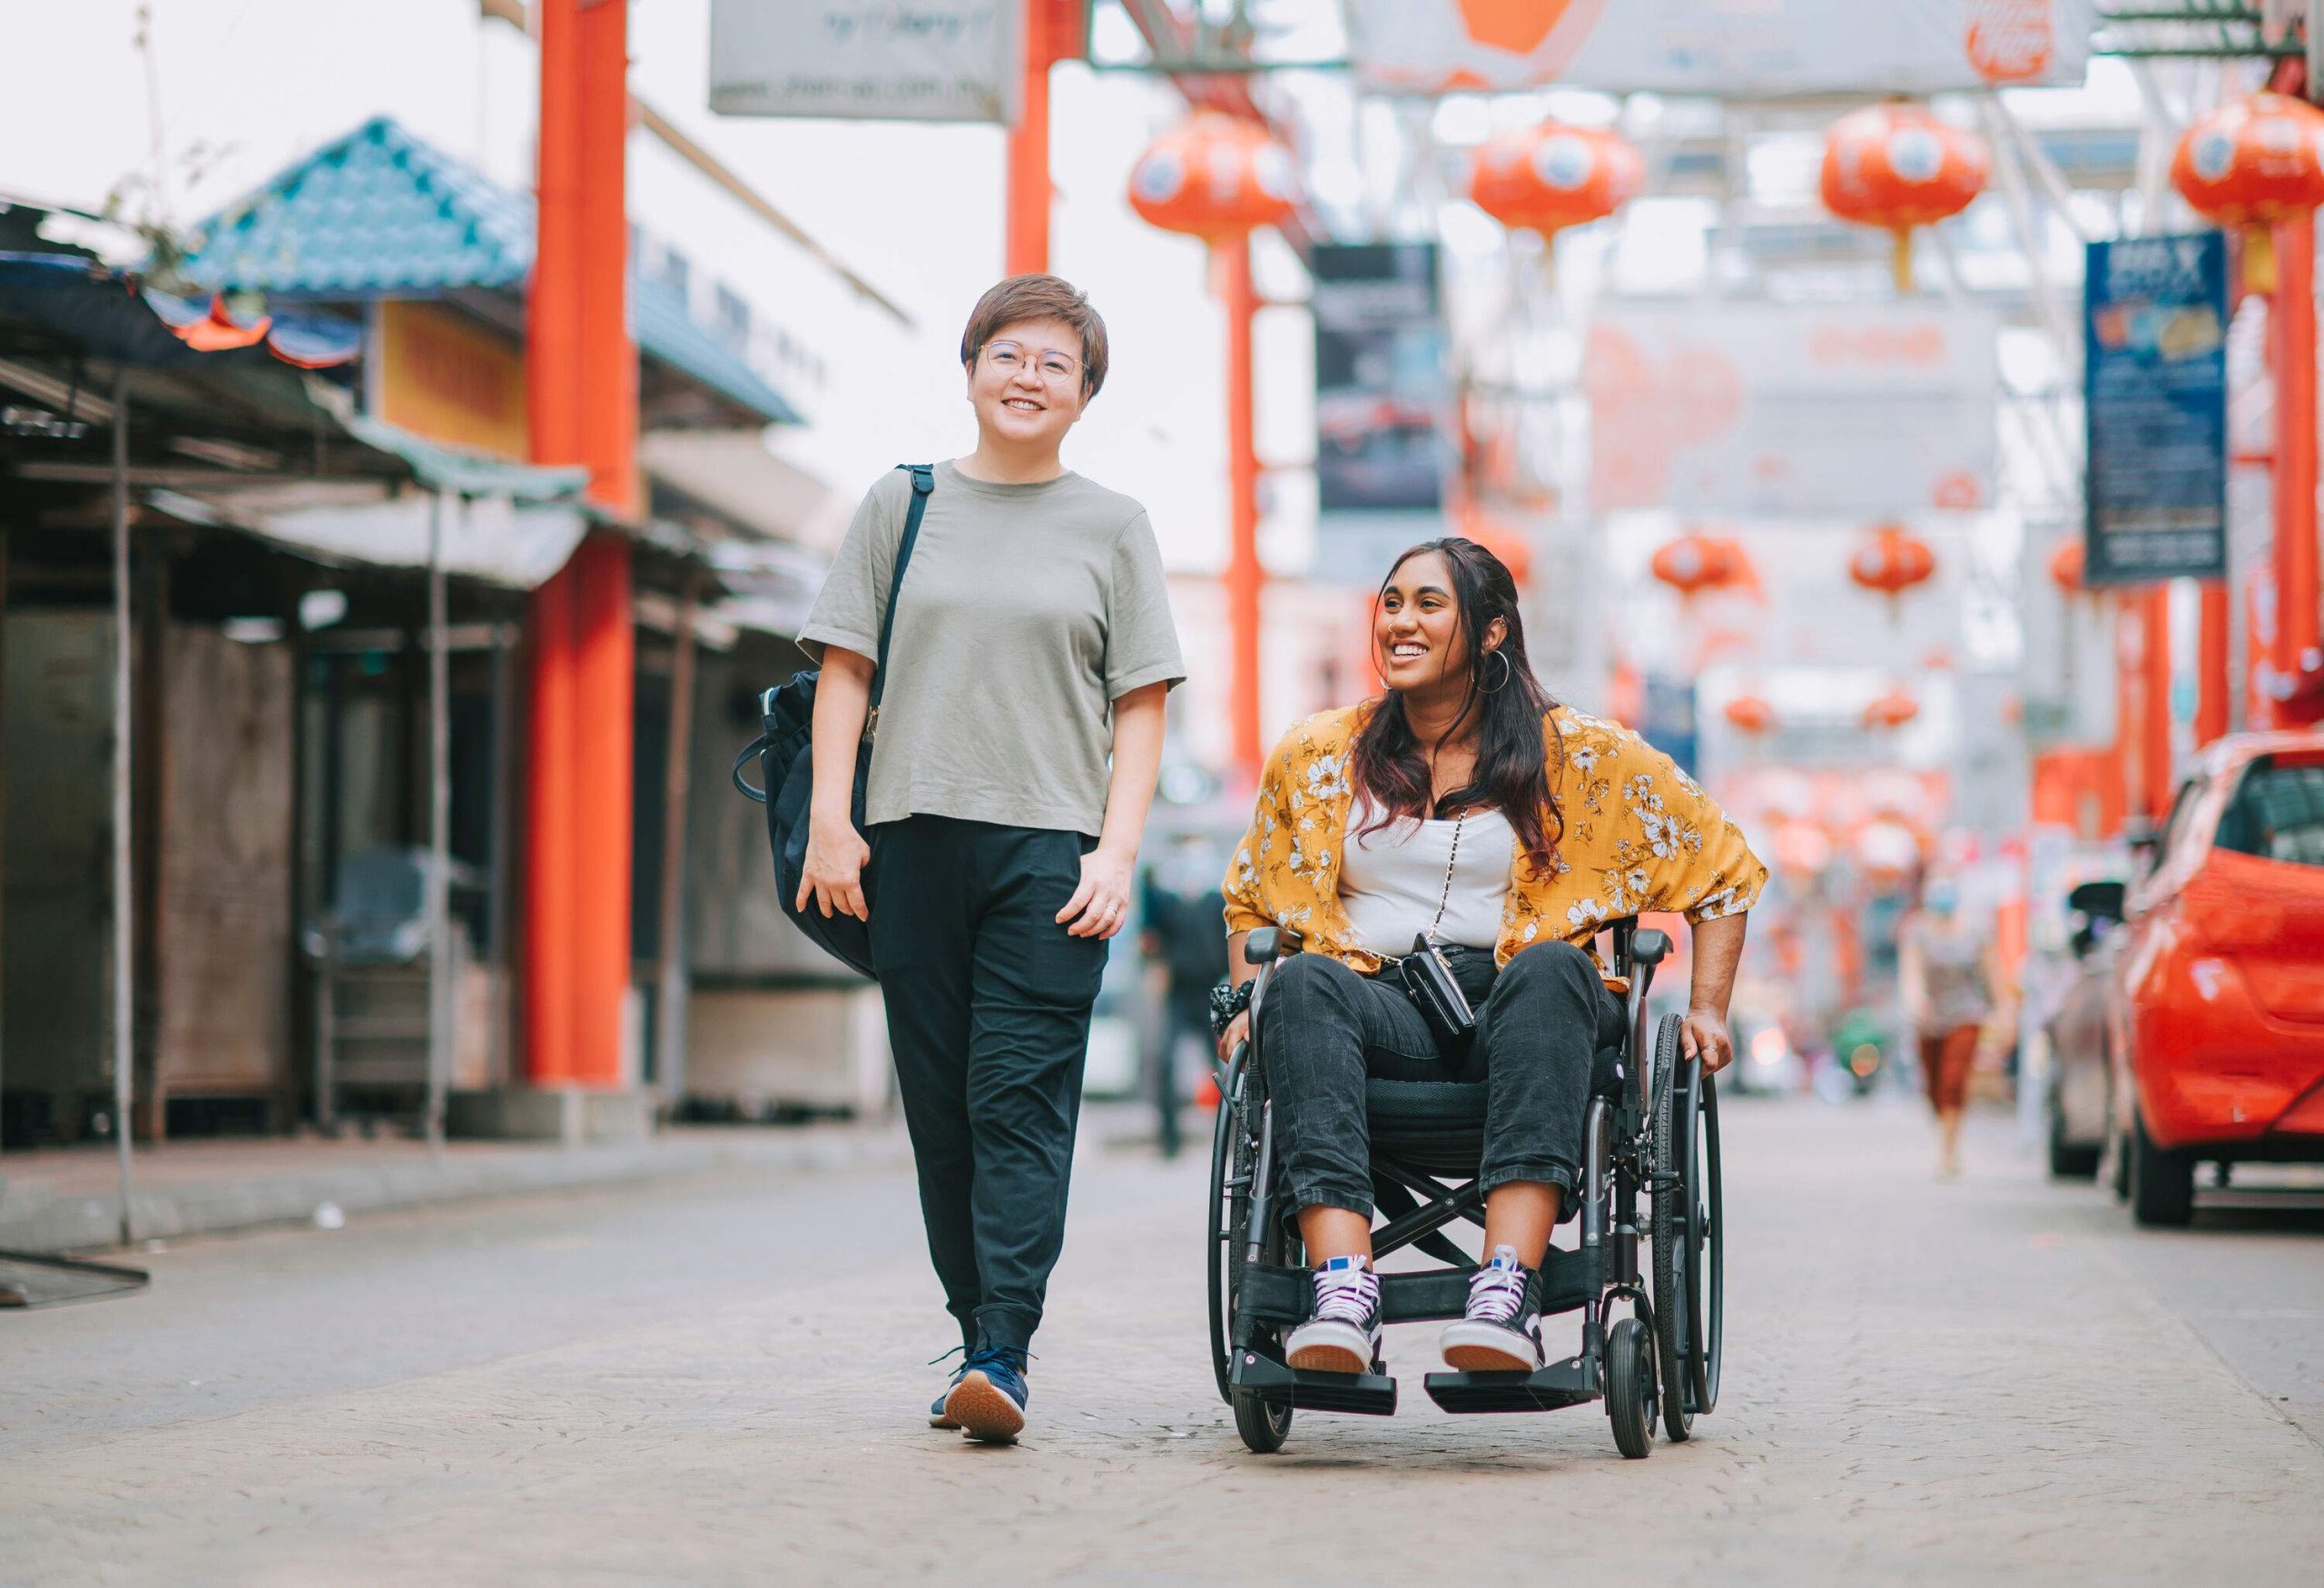 An adult woman walking beside a disabled female in a wheelchair down a city street.